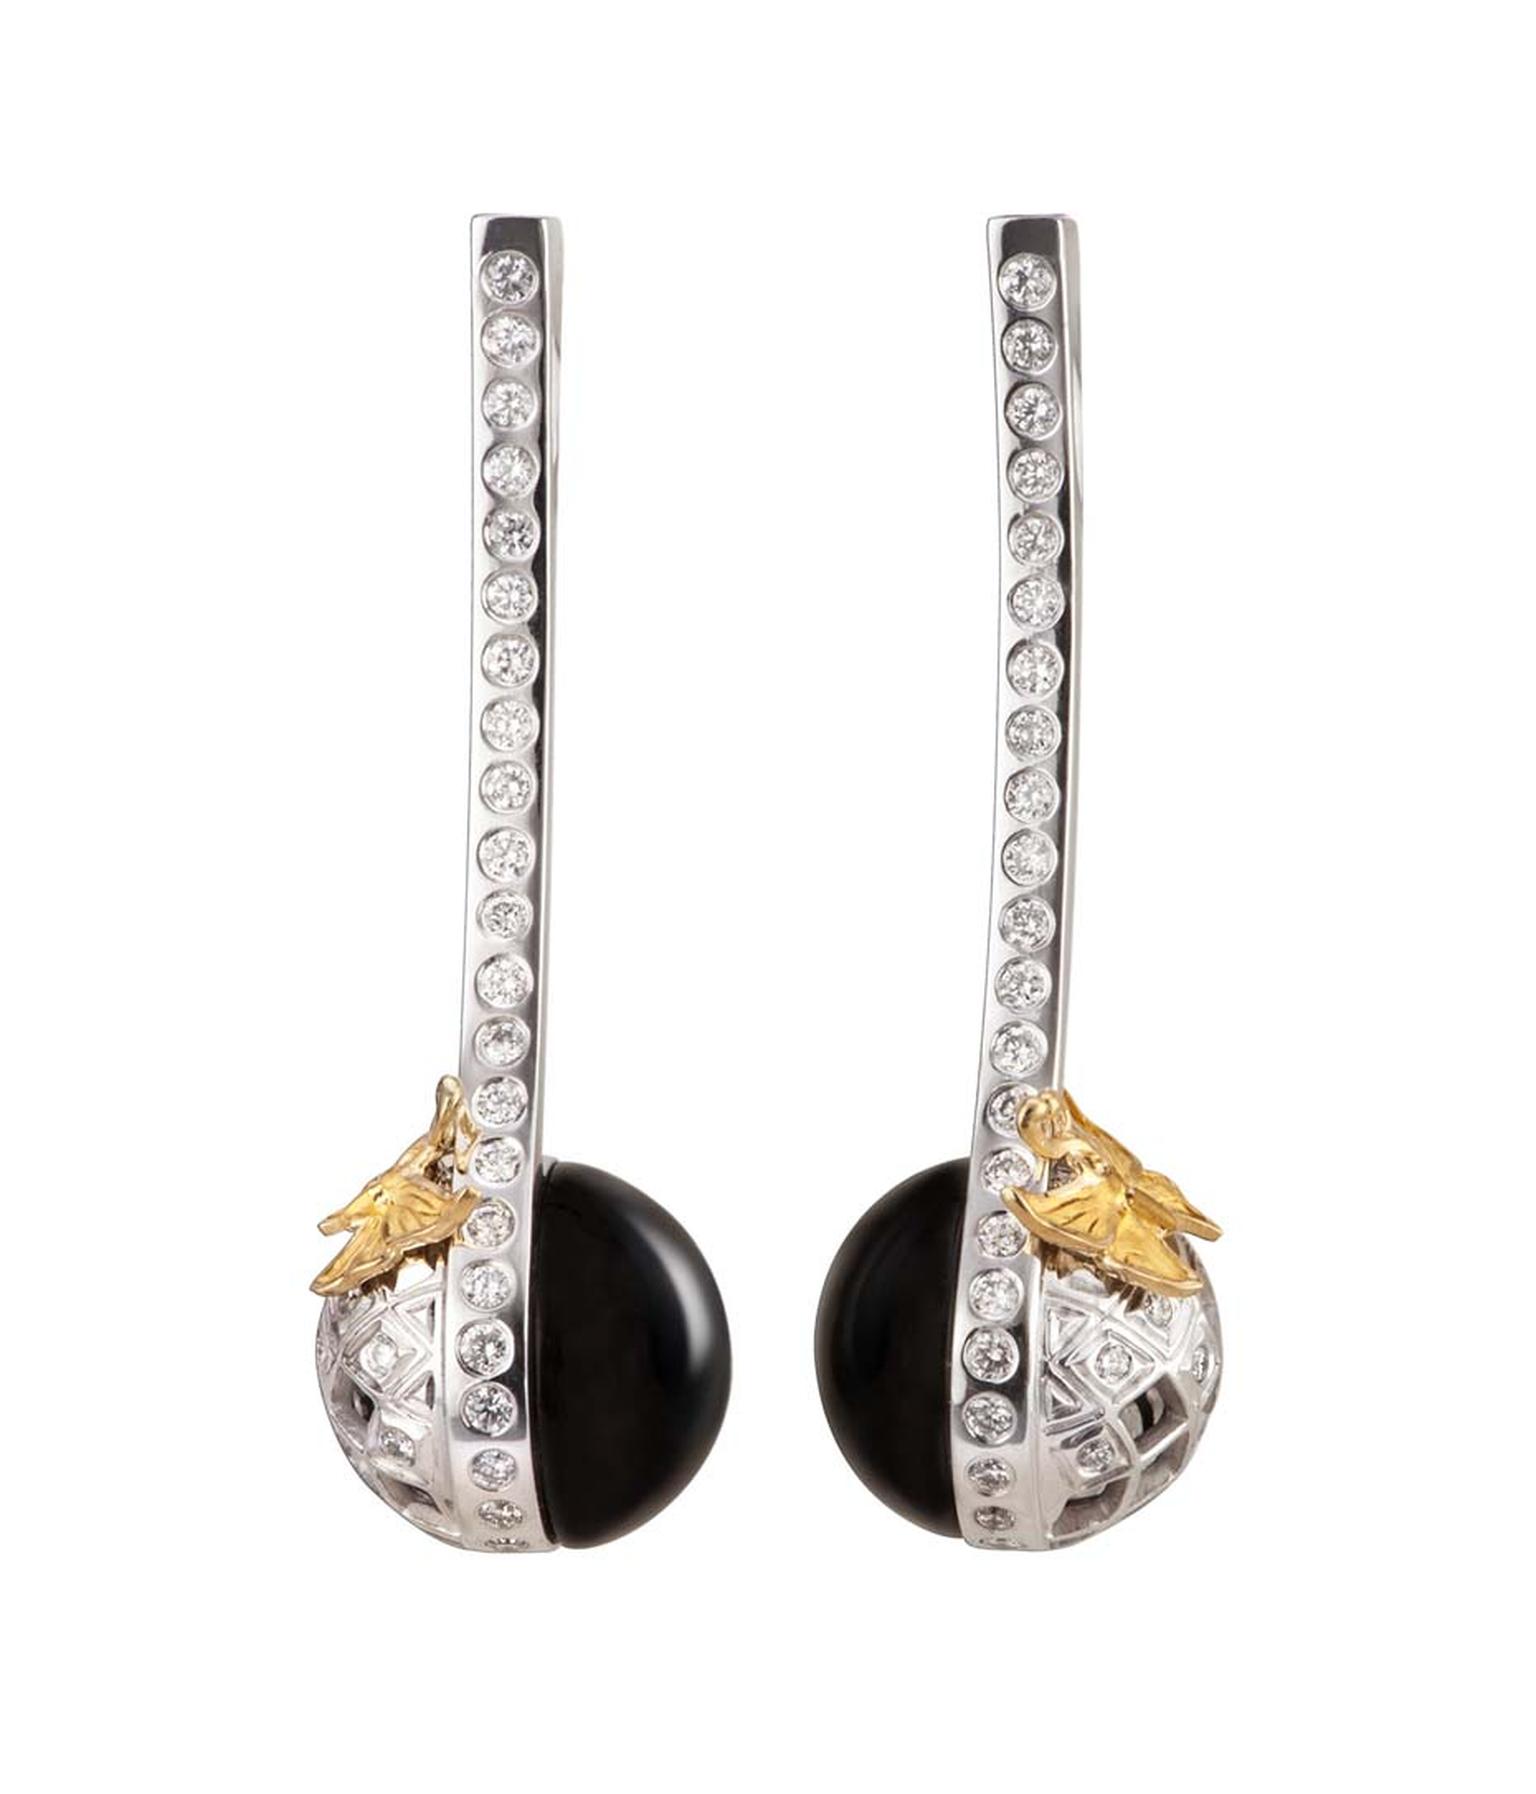 White gold, onyx and diamonds provide the perfect base for the delicate yellow gold butterflies perched on this pair of Carrera y Carrera earrings from the new Universo collection.